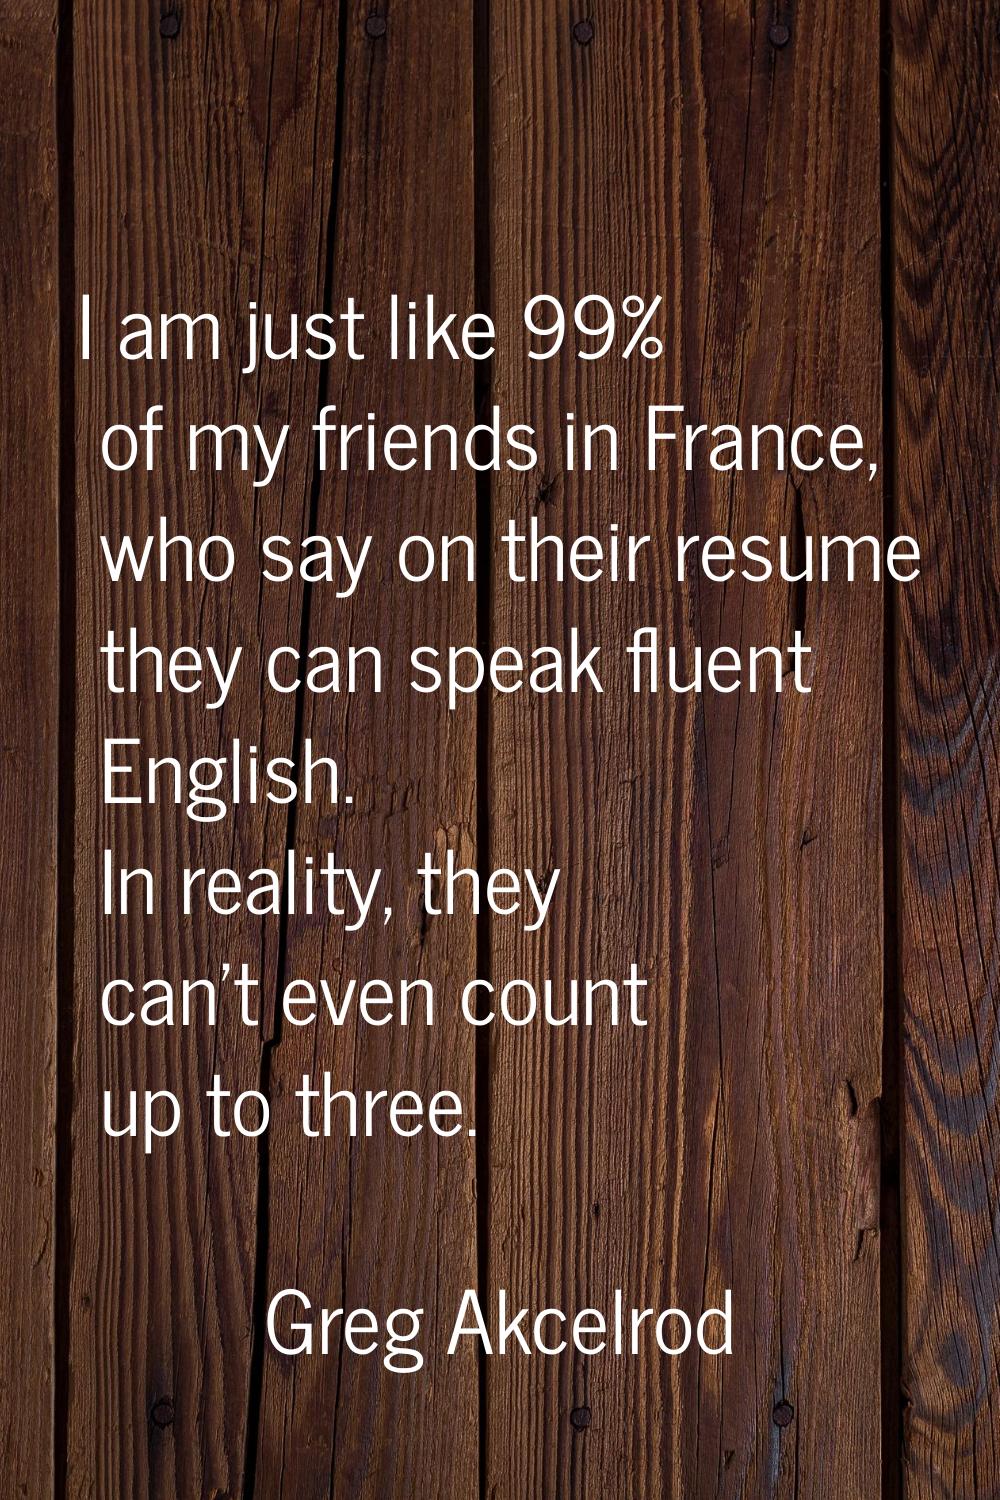 I am just like 99% of my friends in France, who say on their resume they can speak fluent English. 